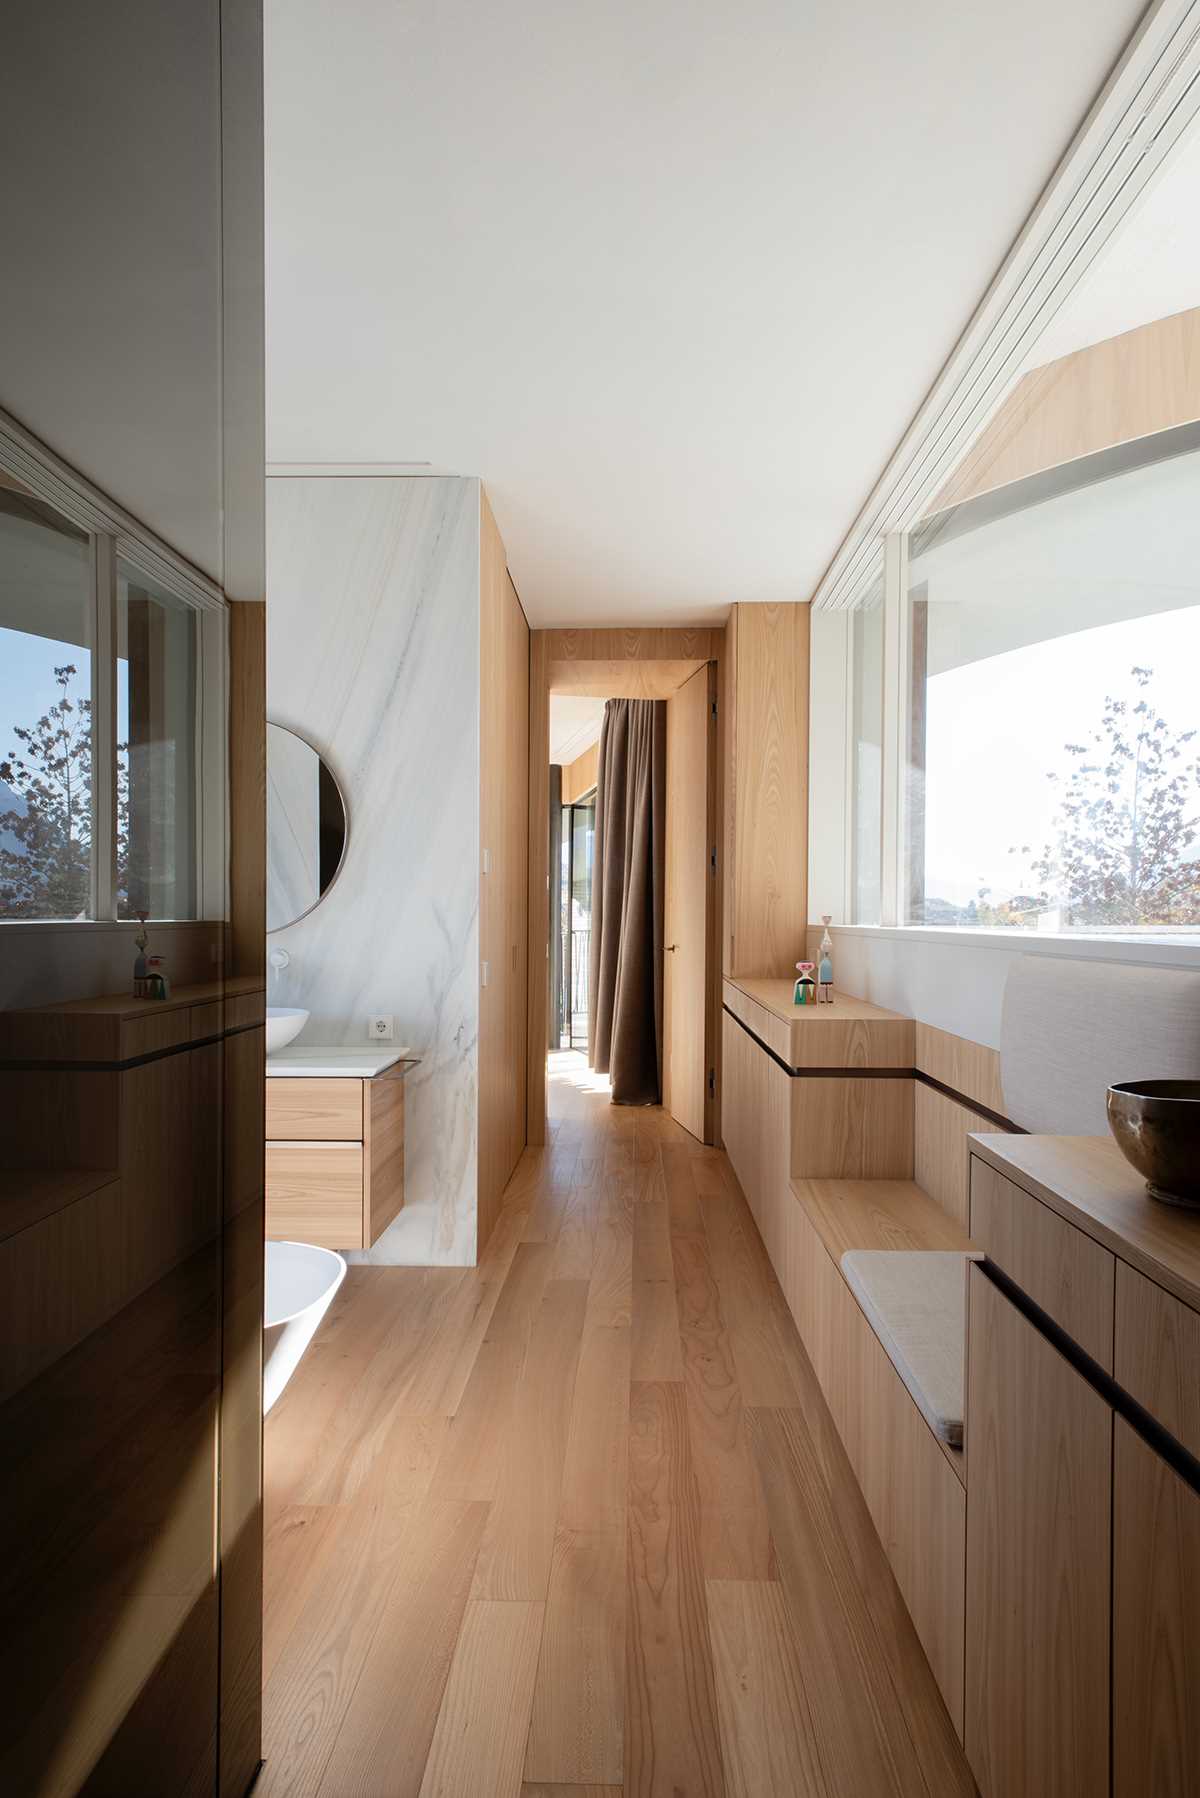 In this modern bathroom, there's built-in cabinetry, a double vanity, and a freestanding bathtub.